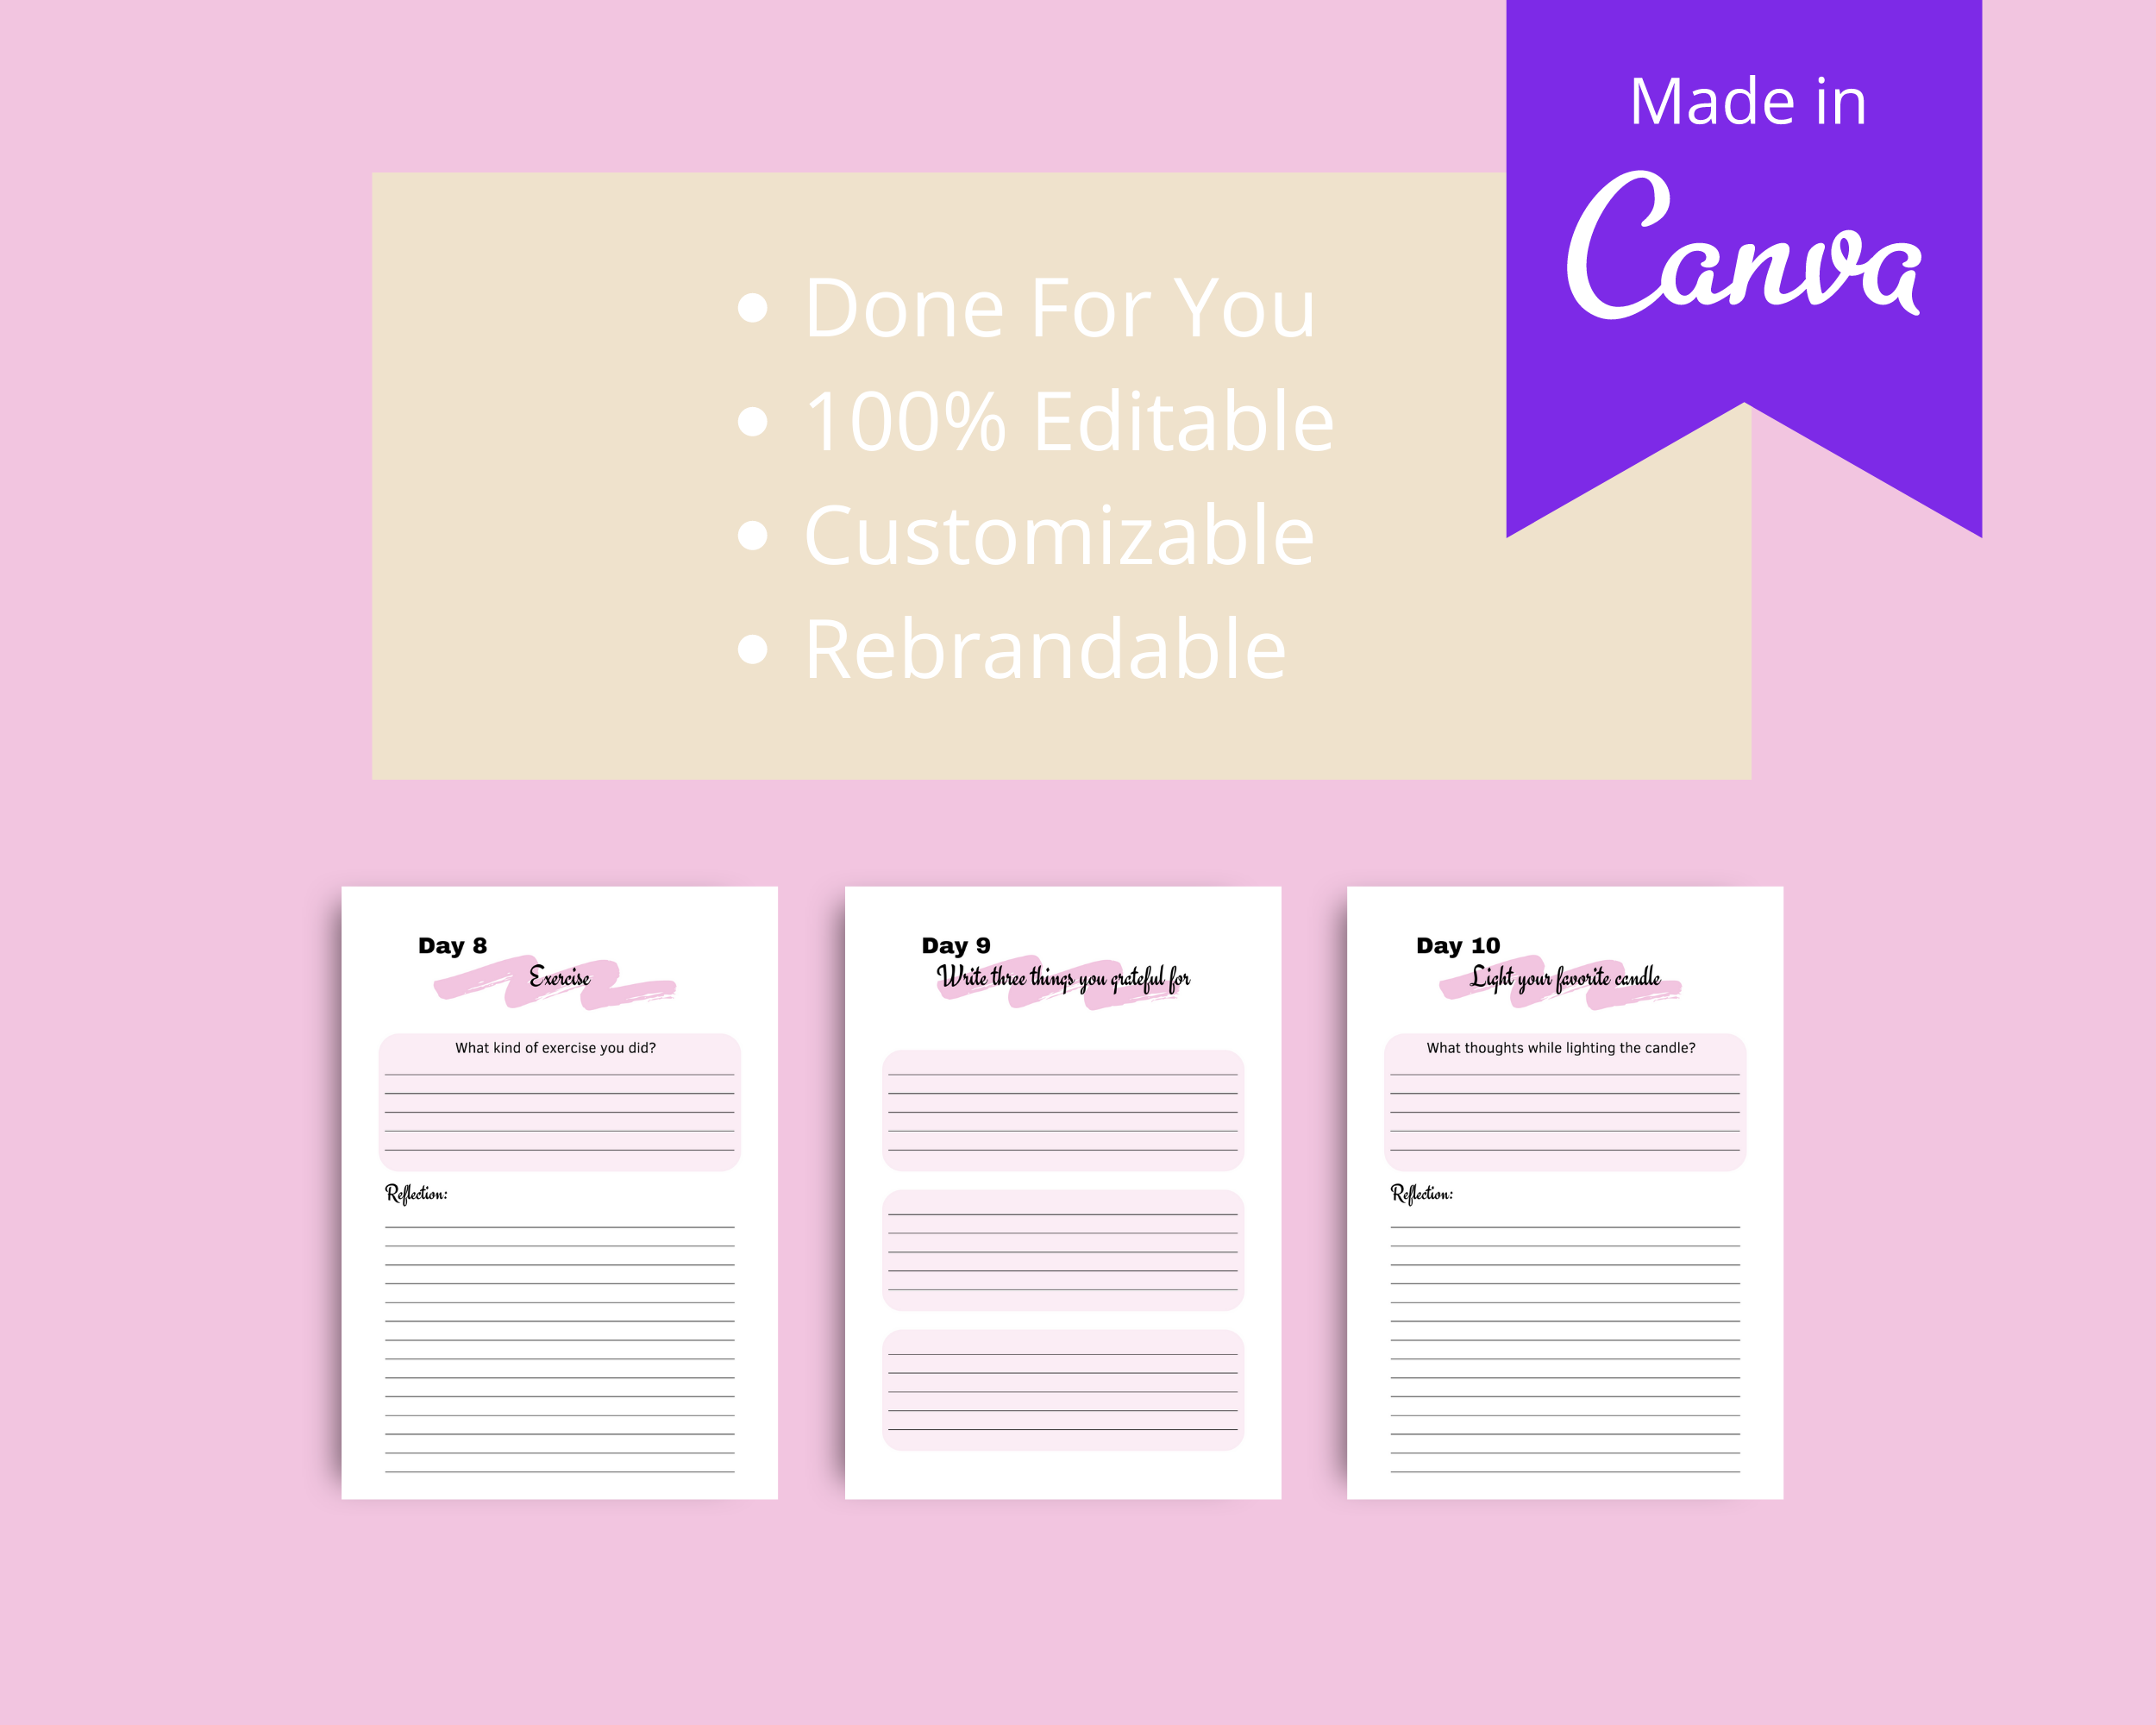 30-Day Happiness Challenge | Editable Canva Template A4 Size